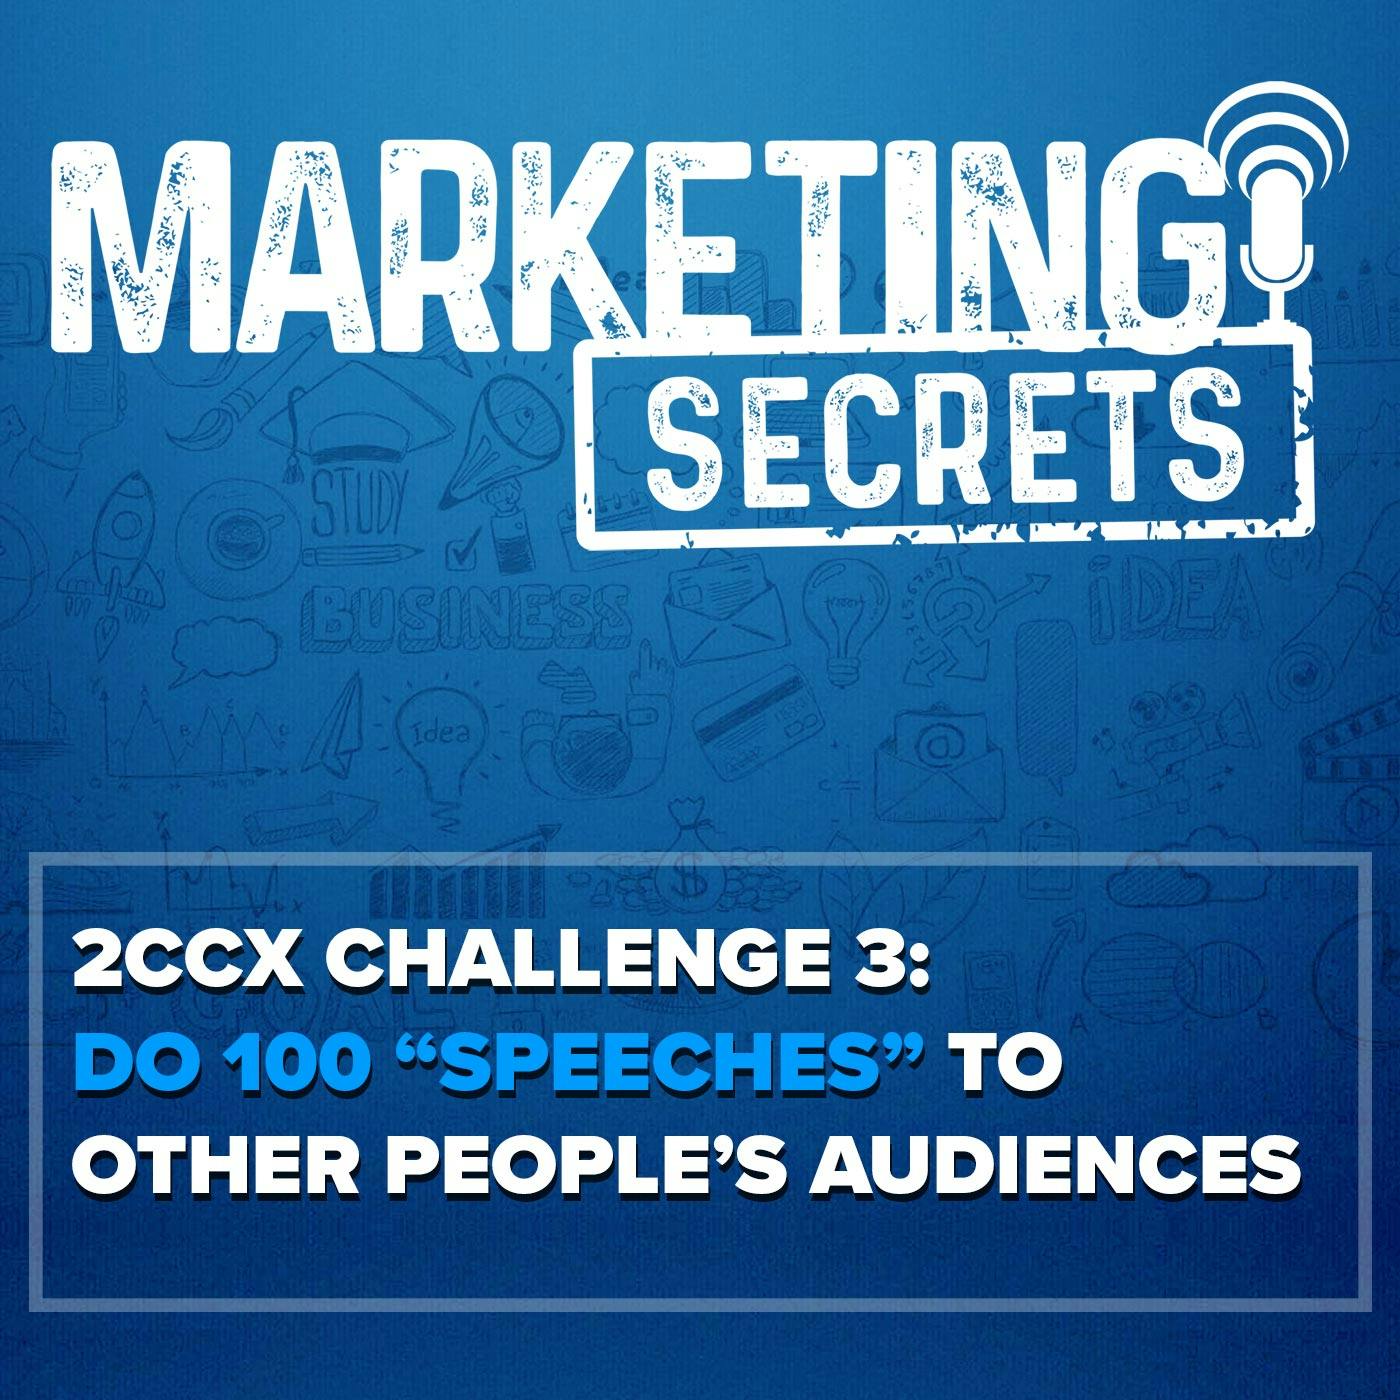 2CCX Challenge 3: Do 100 "Speeches" To Other People’s Audiences